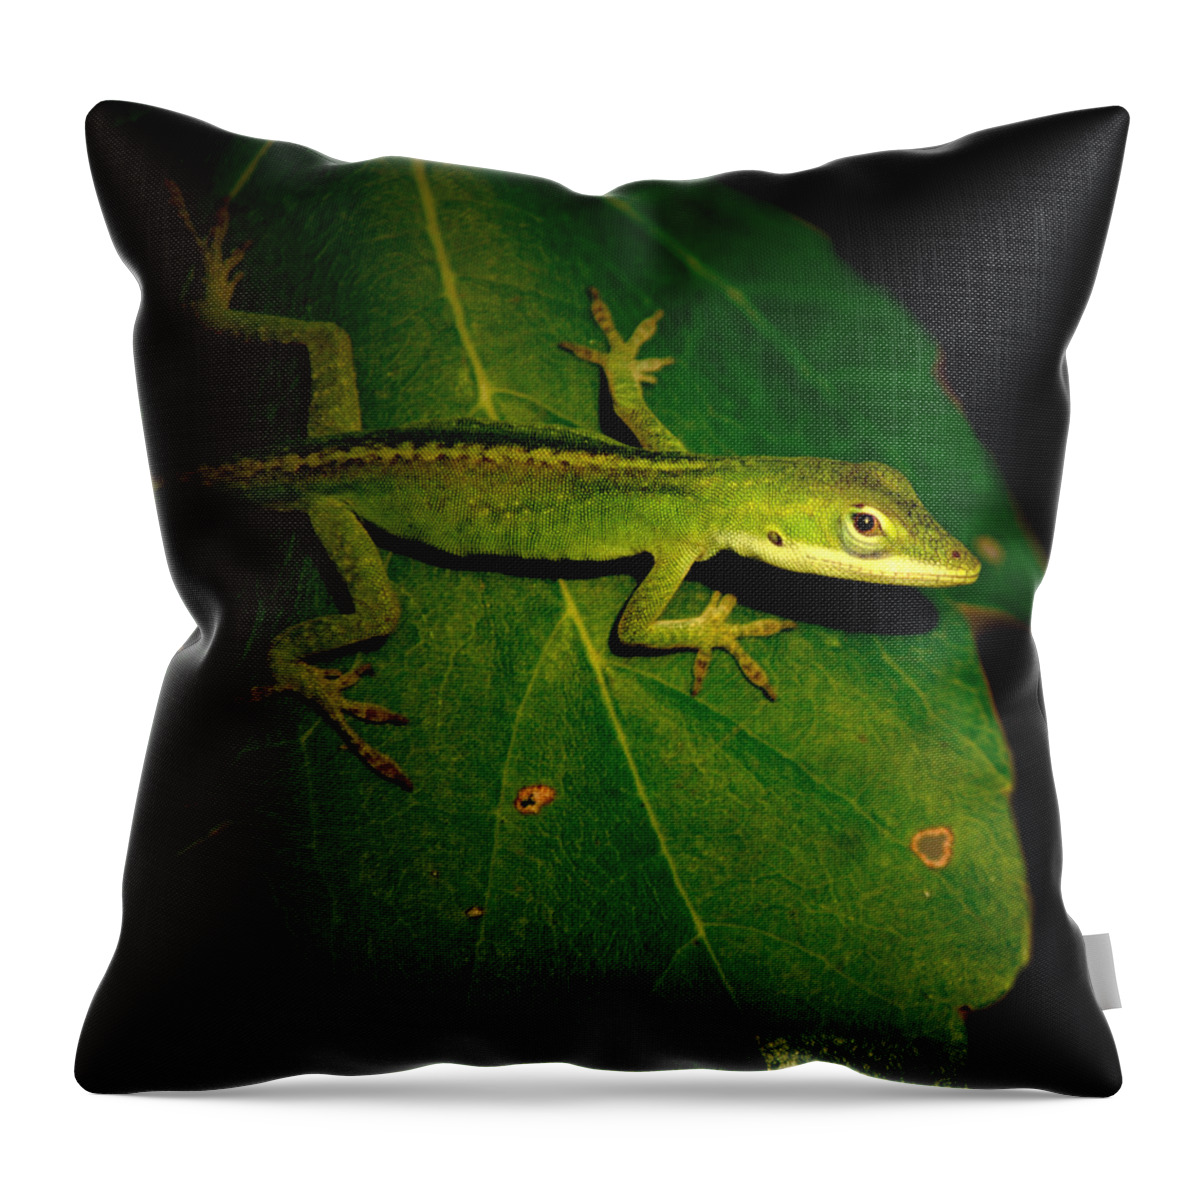  Throw Pillow featuring the photograph Lizard 5 by David Weeks